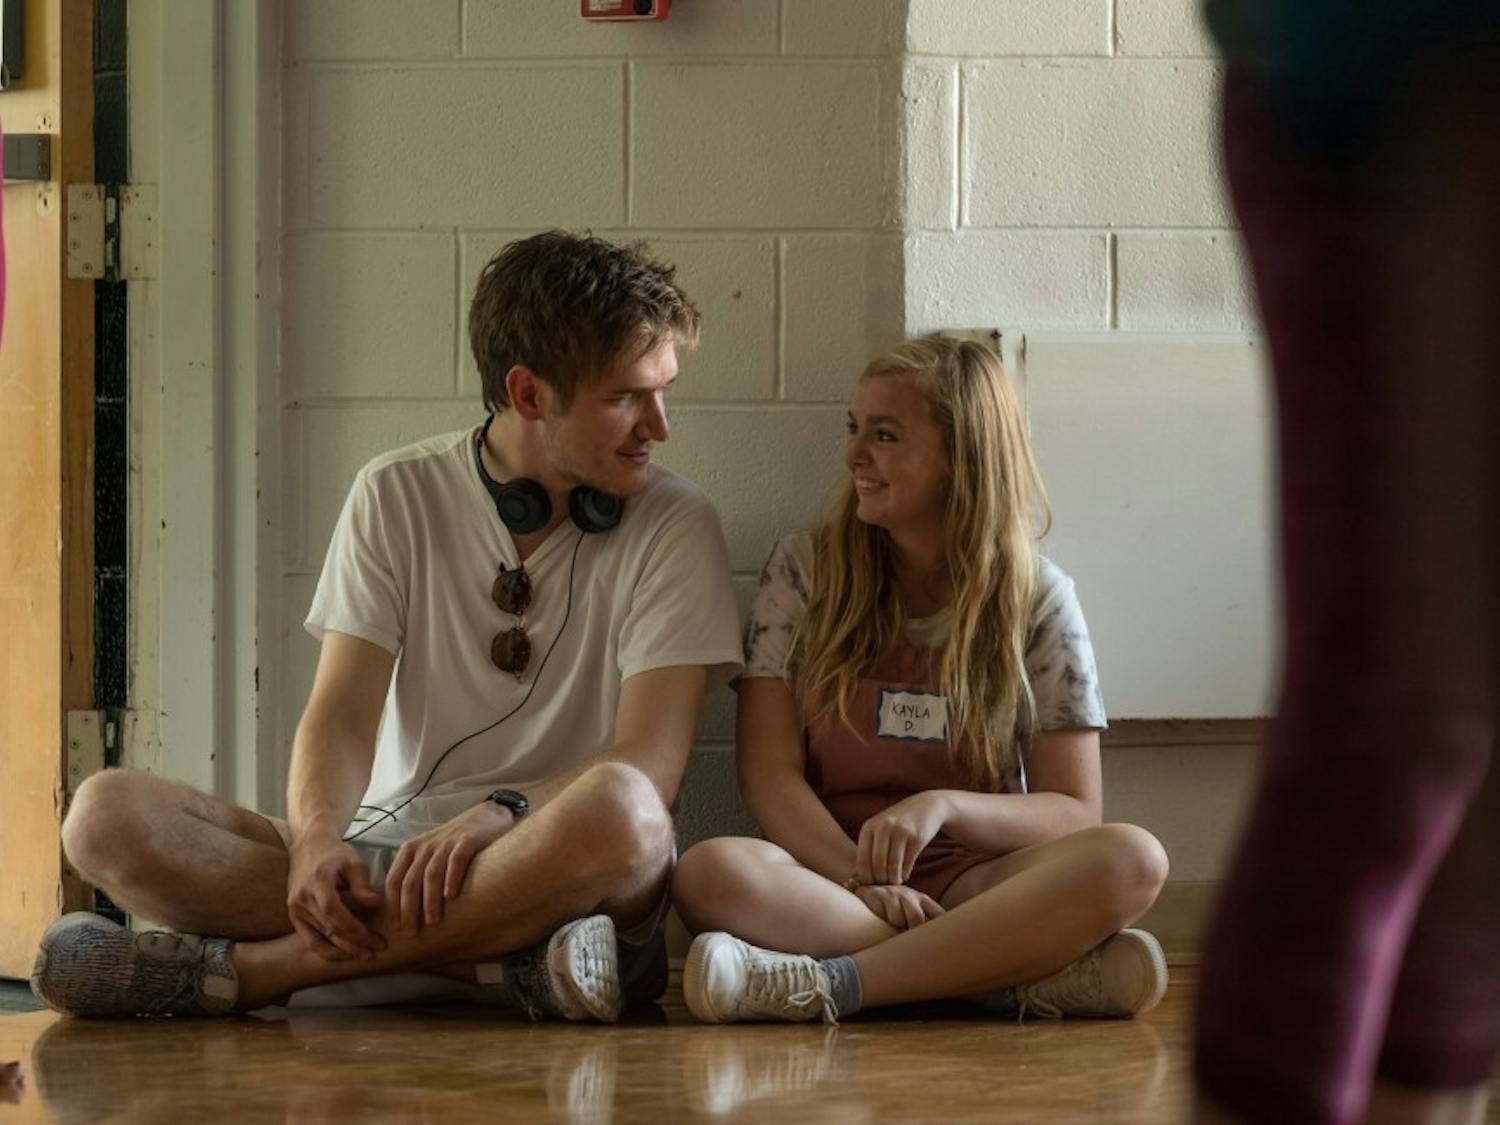 Bo Burnham's "Eighth Grade" follows Kayla Day on her last week of eighth grade, and doesn't shy away from showing every awkward moment of adolescence.